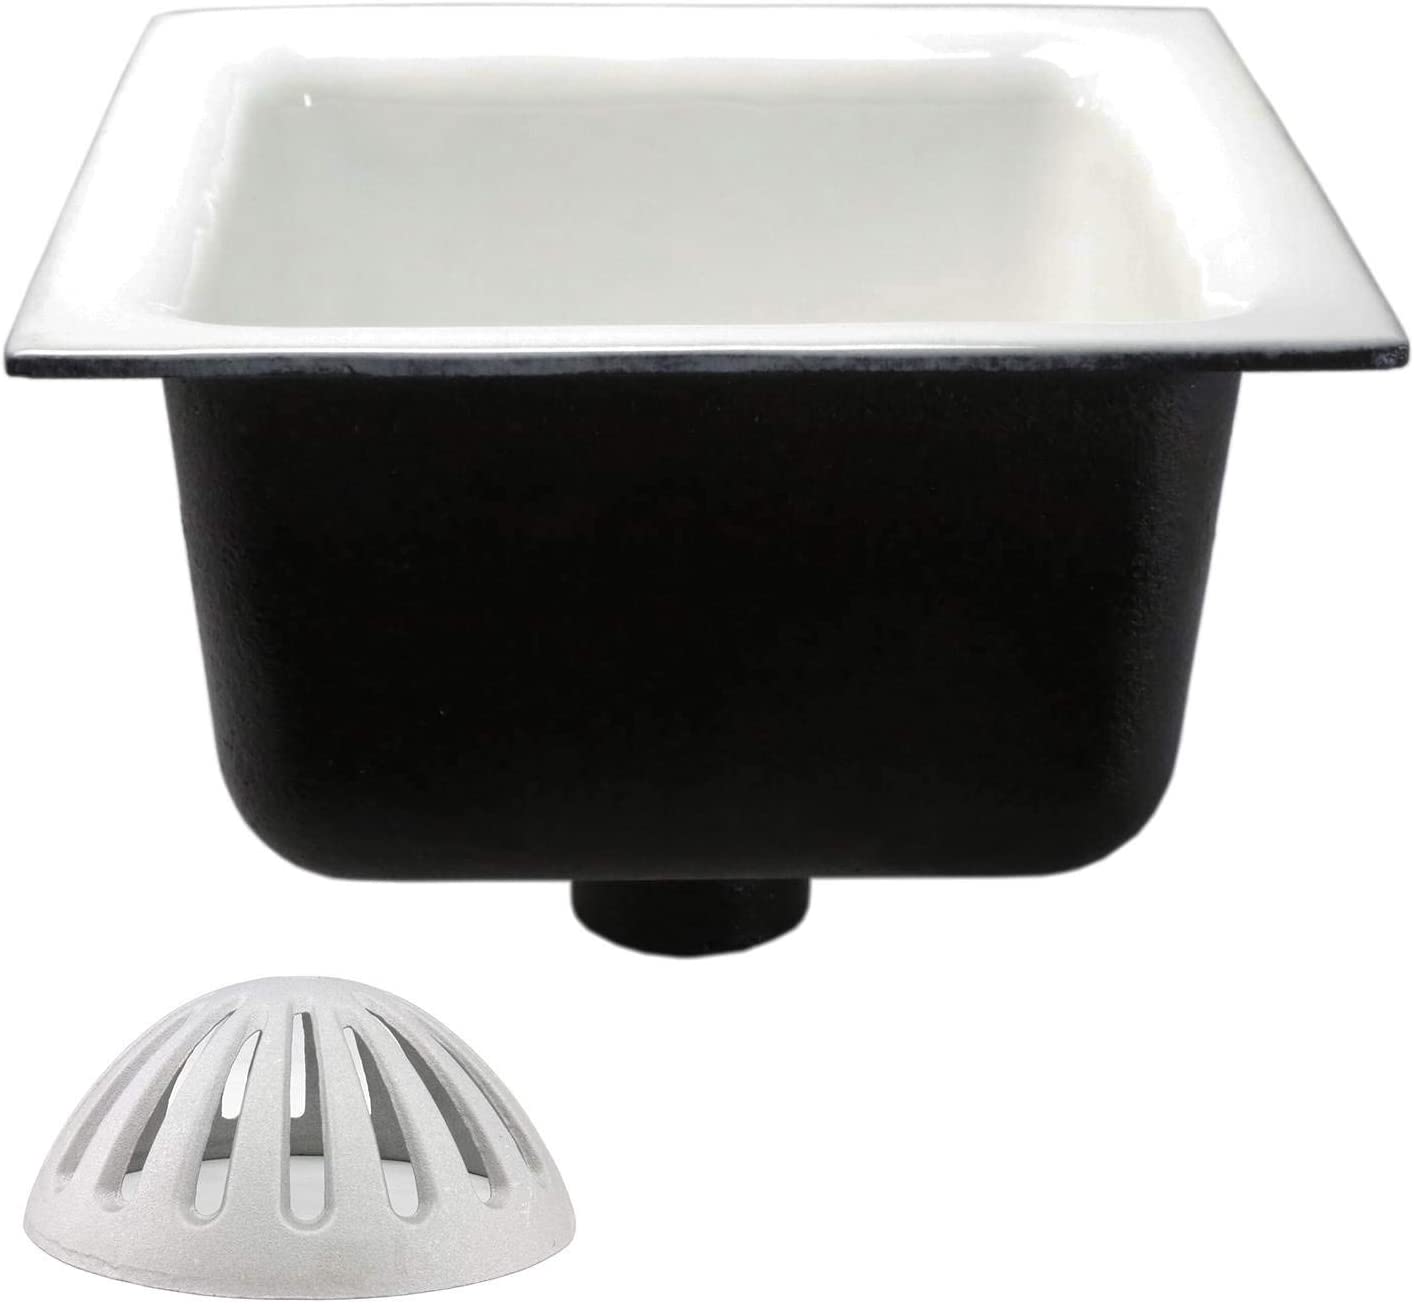 GSW Floor Sink with Dome Strainer, Cast Iron Body & Ceramic Surface 12”W x 12”L x 6”H - Perfect for Restaurant, Bar, Buffet (2” Drain)